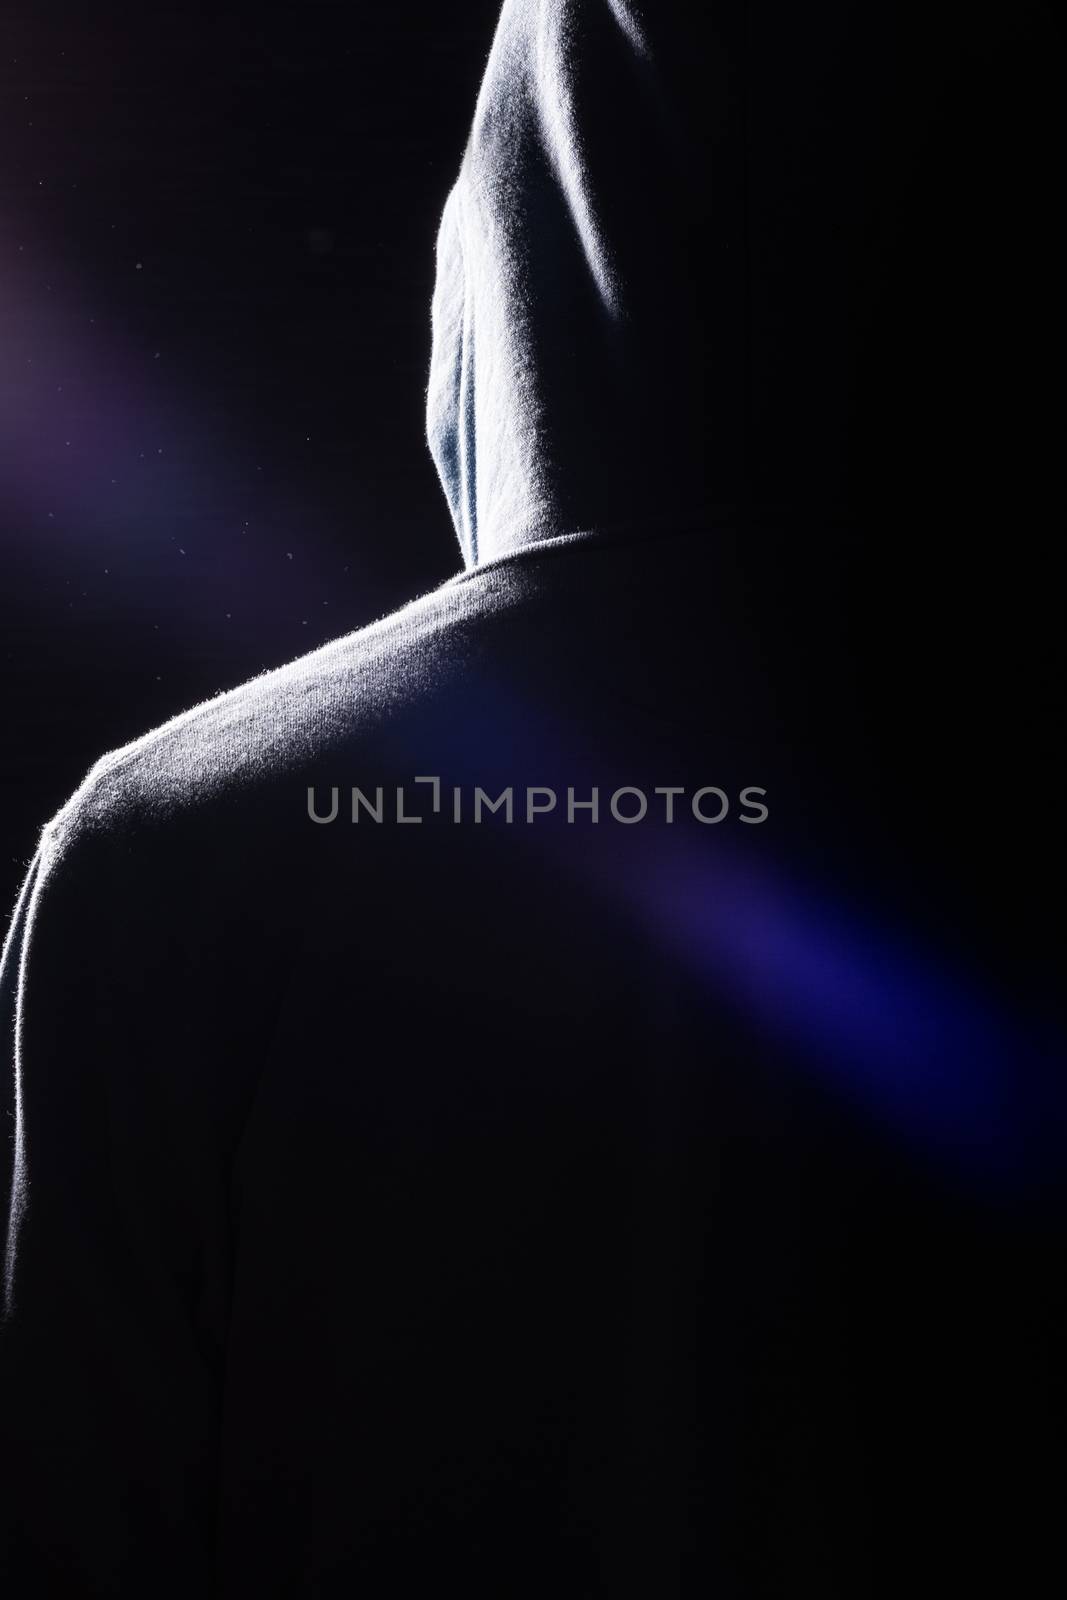 A dark silhouette of a man wearing a hooded sweatshirt with very dramatic shadows, lens flare and dust in the air.